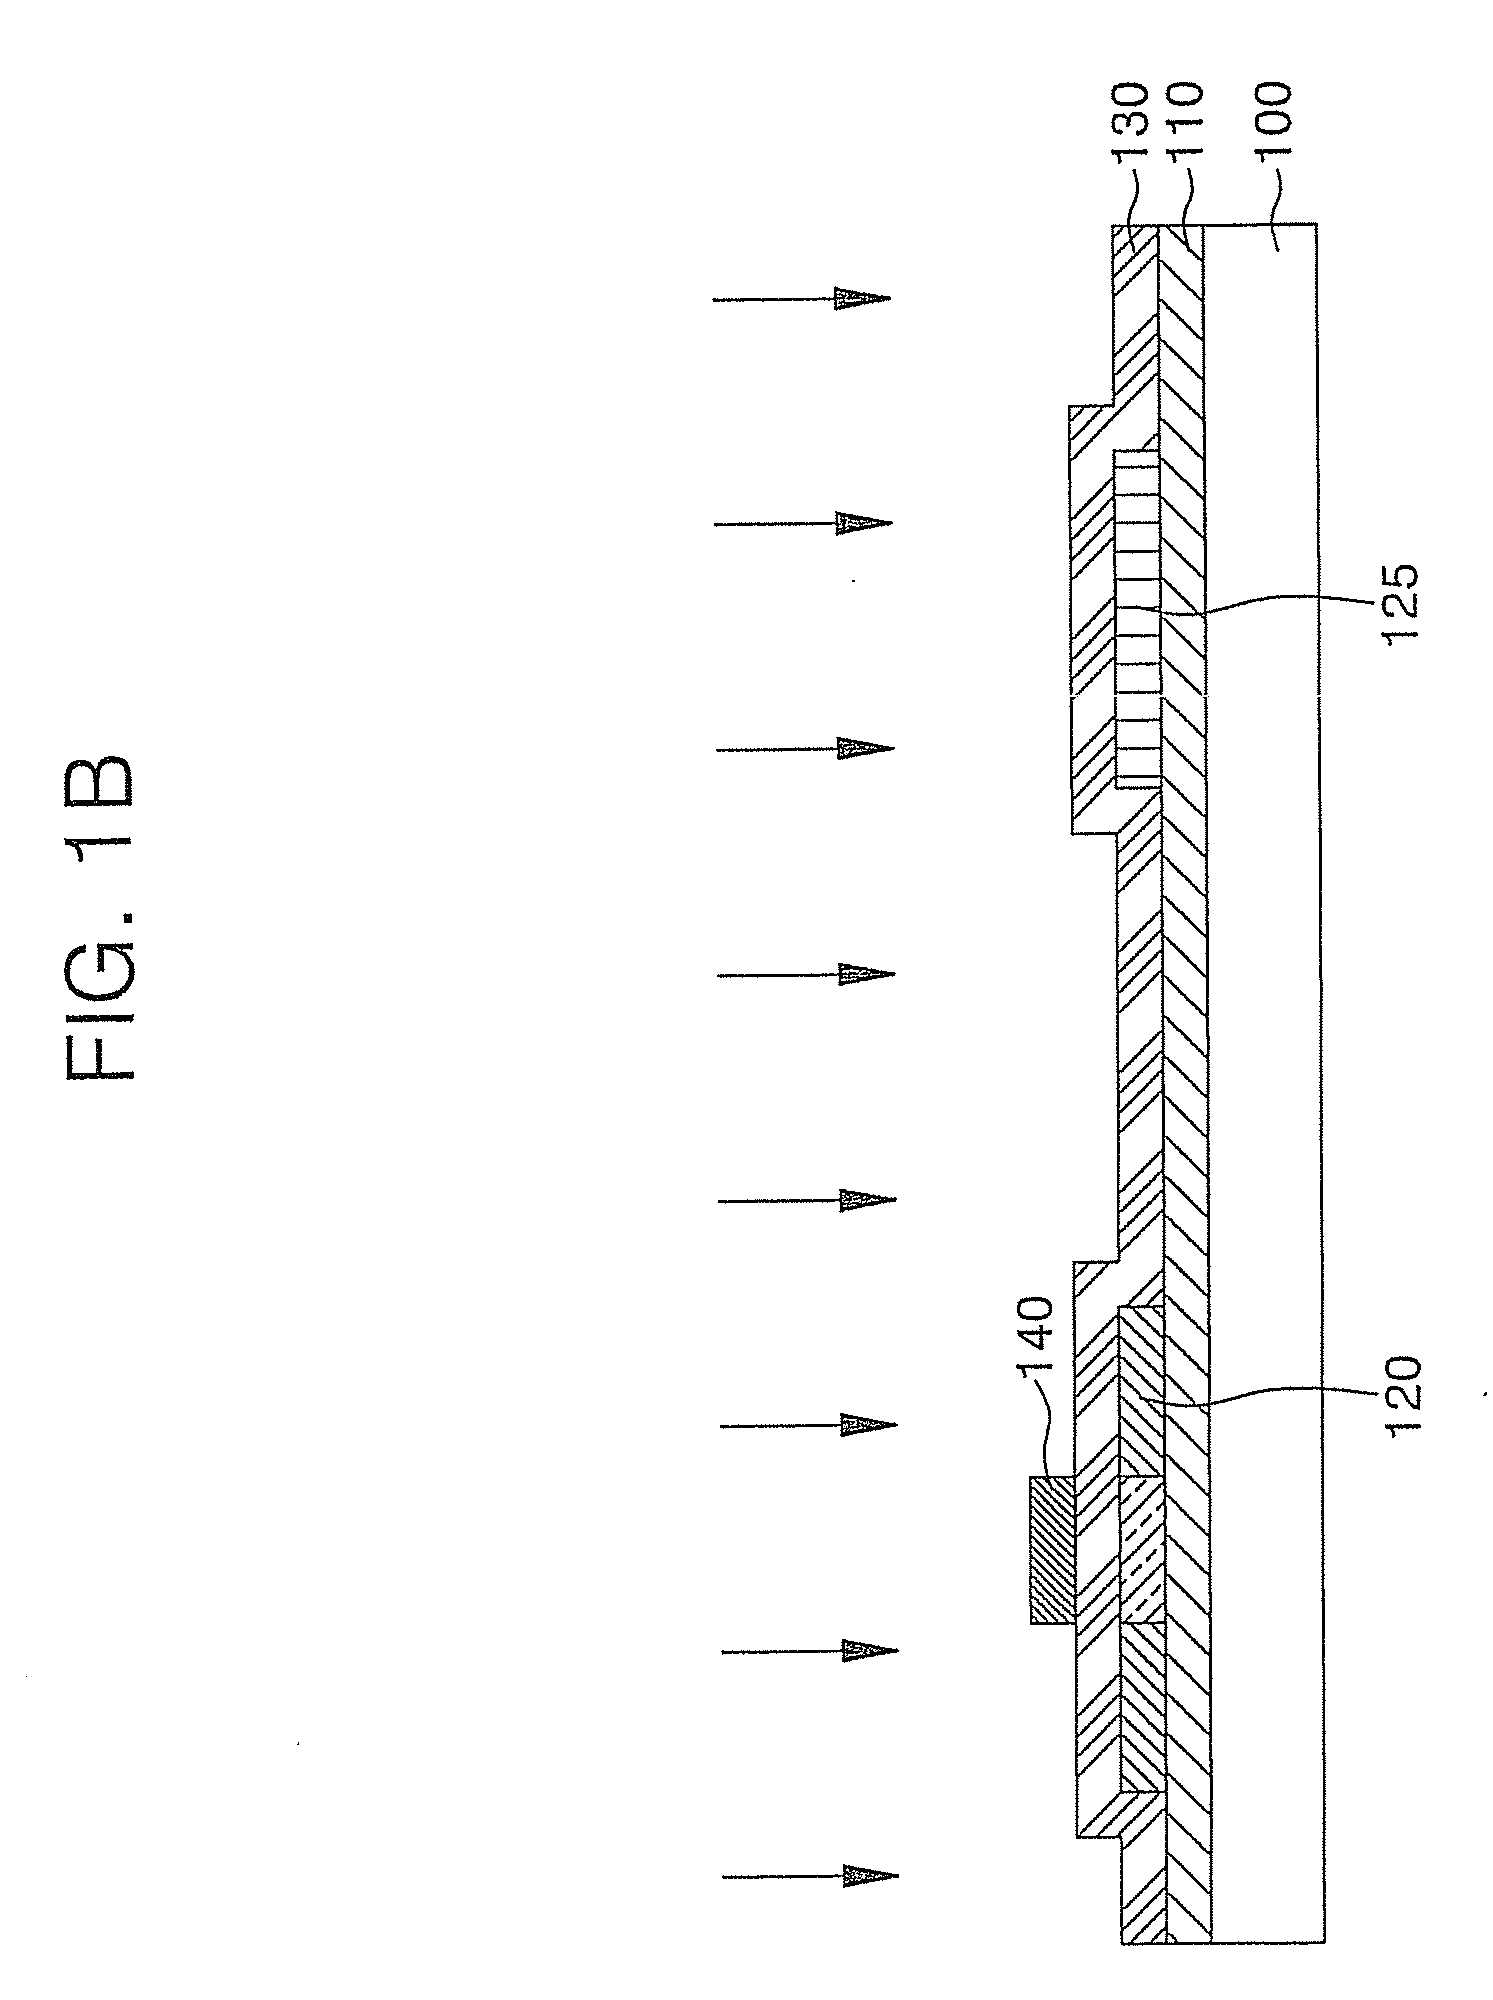 Organic light emitting diode display device and method of manufacturing the same